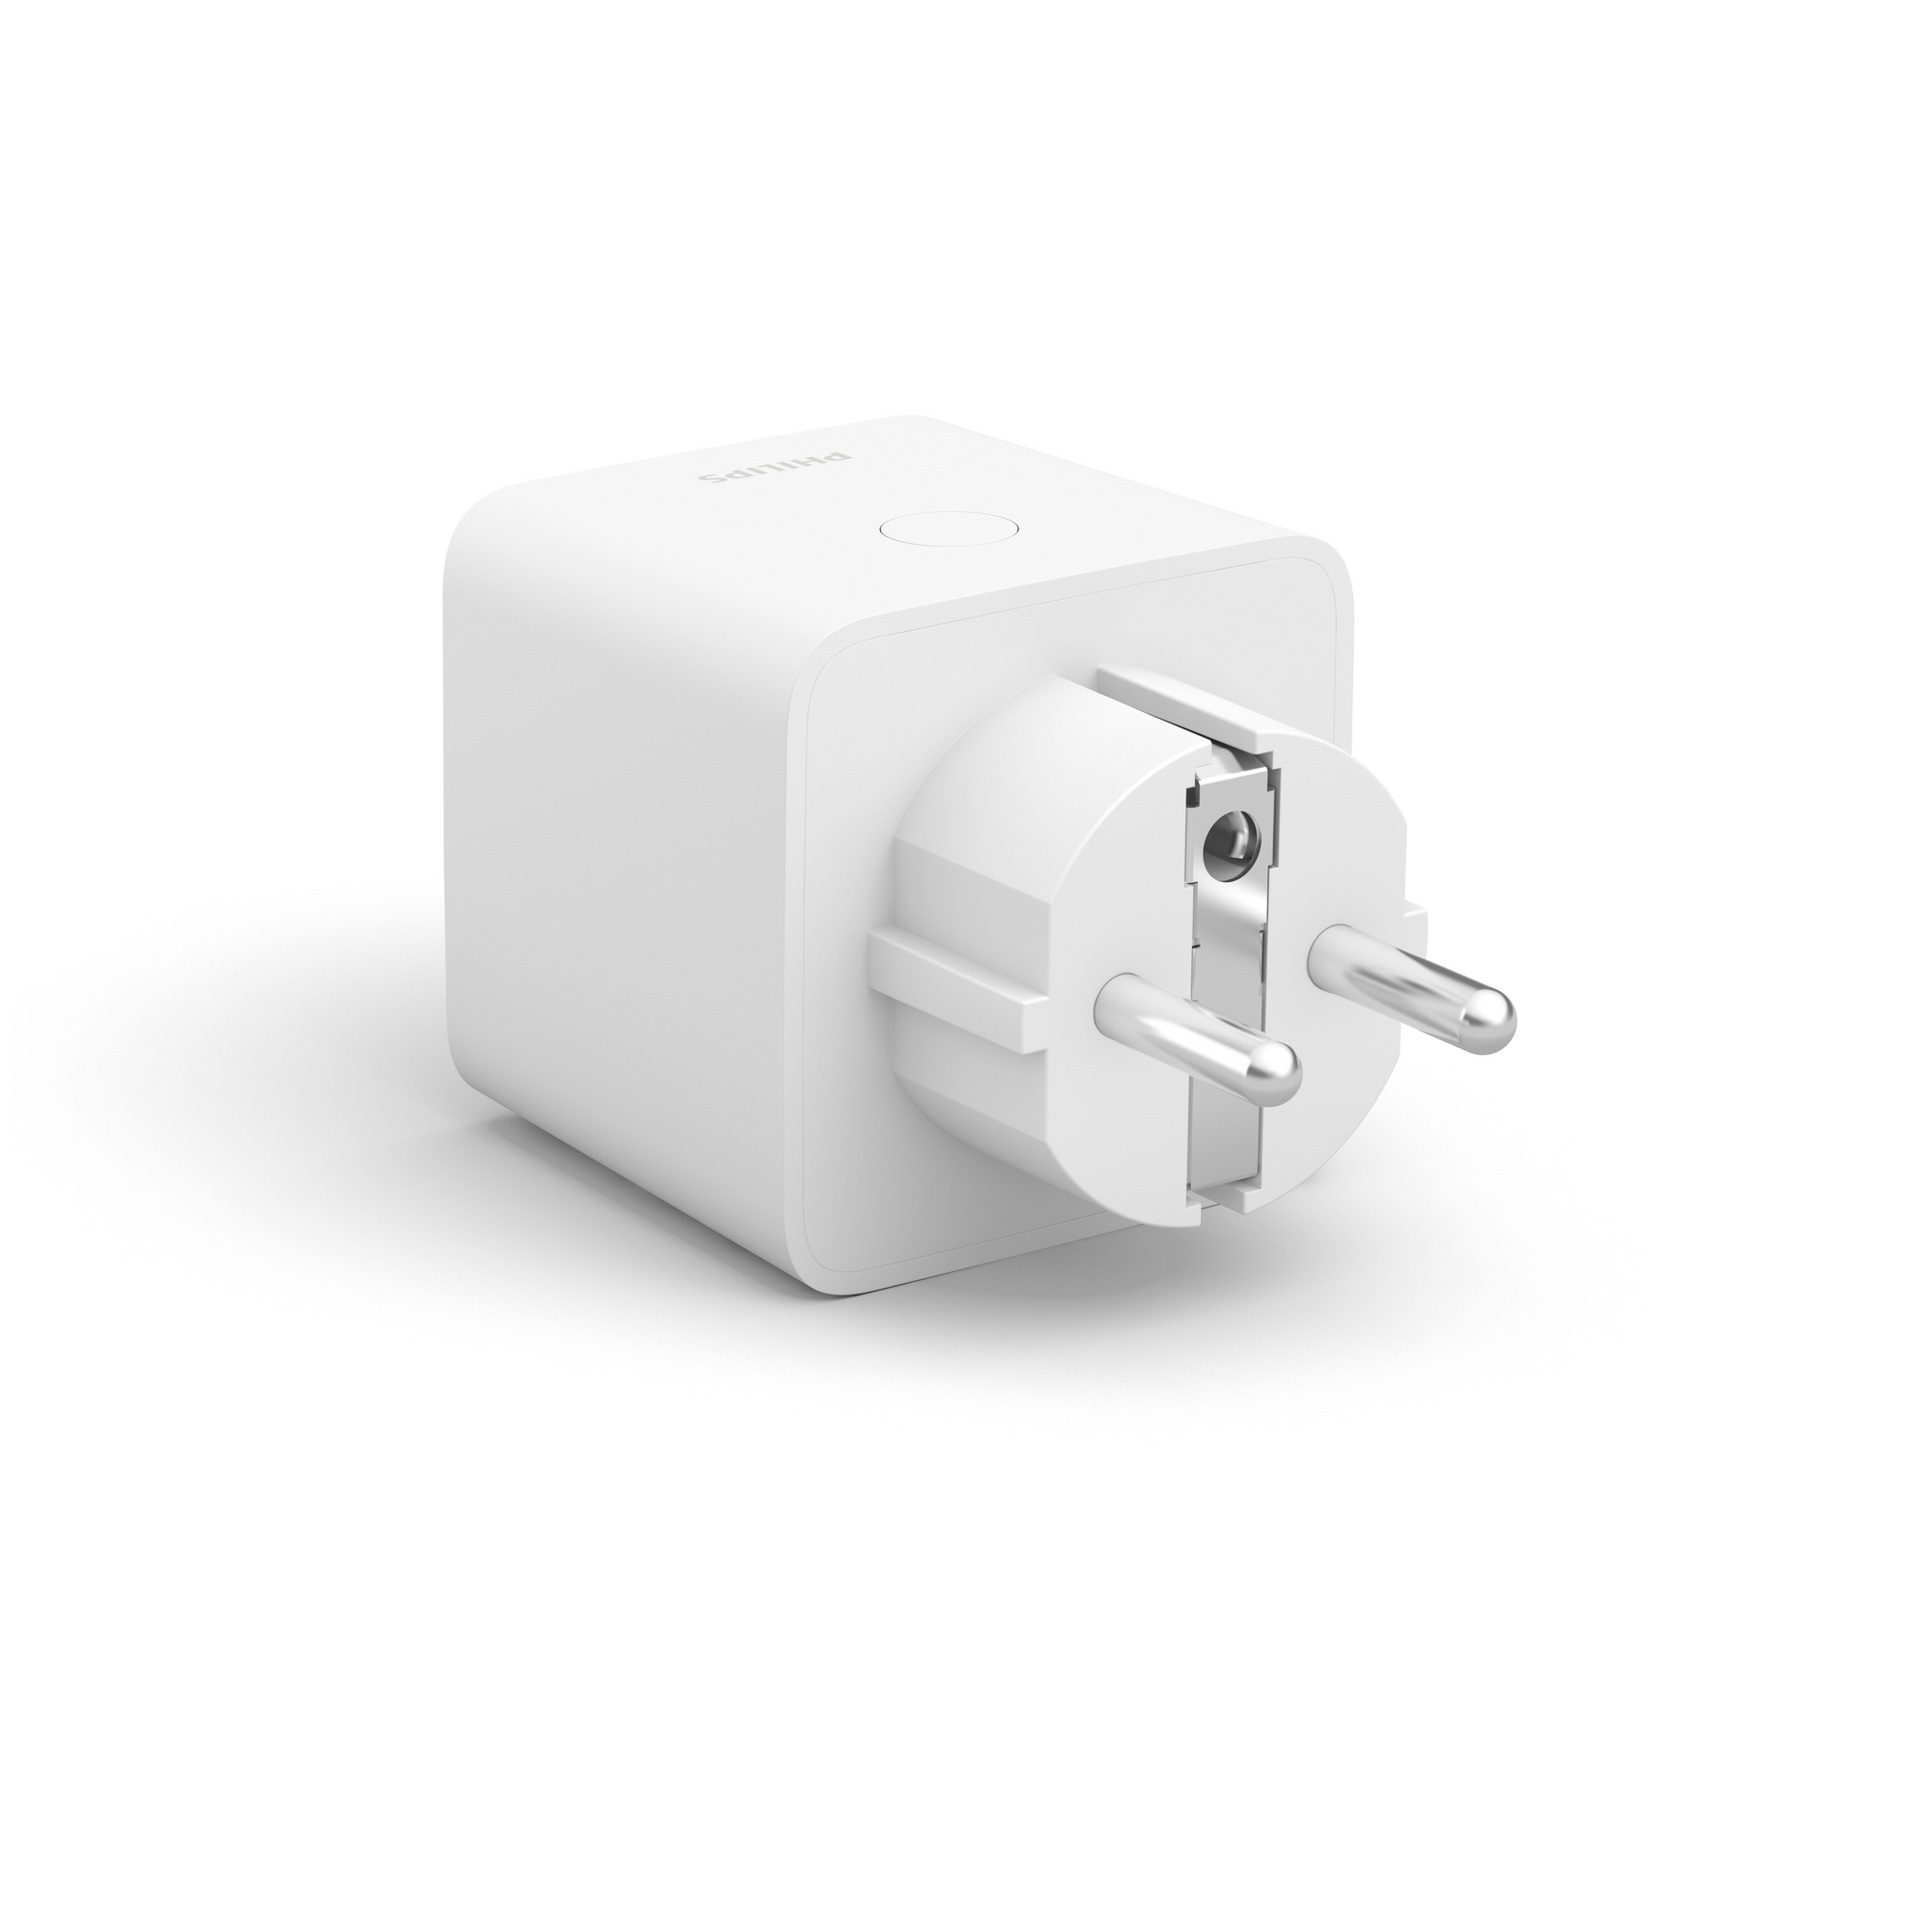 SmartPlug Steckdose 'Hue' + product picture